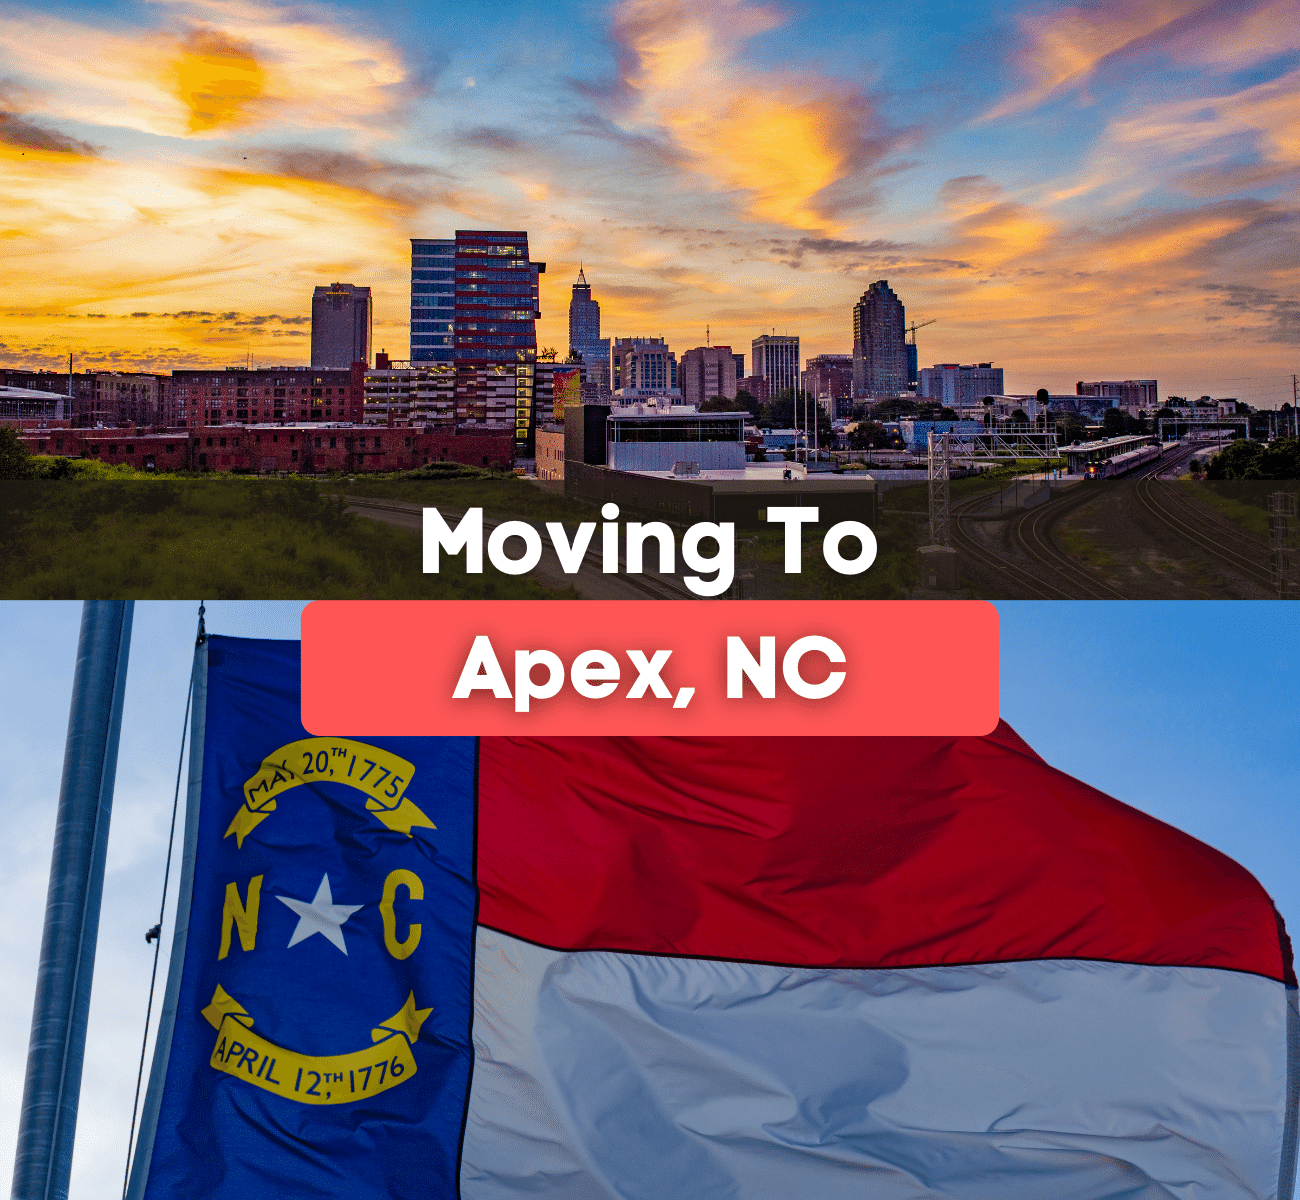 Moving to Apex, NC - What is it like living in Apex?